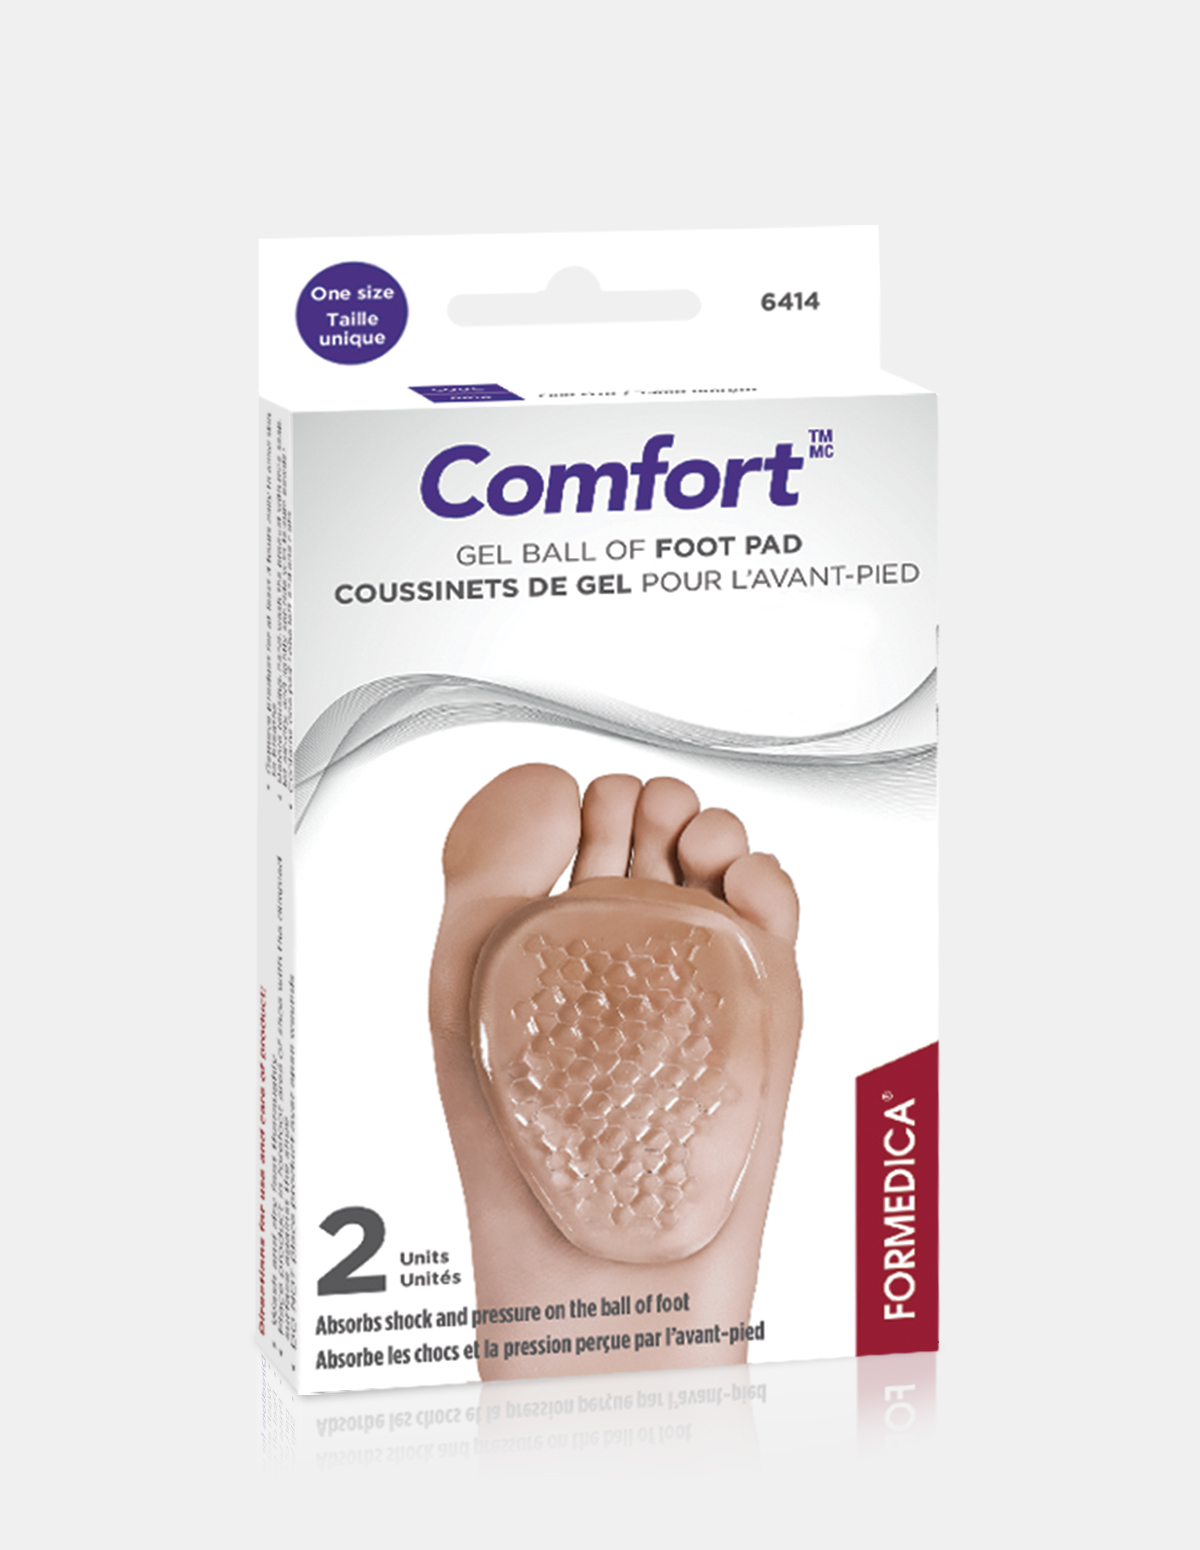 Running & More Mortons Neuroma Bunions Premium Metatarsal Pads for Men & Women by Oxygen Swiss Lab Soft Silicone Gel Ball of Foot Pads for Athletes Soothe Feet Pain Instantly High Heels 